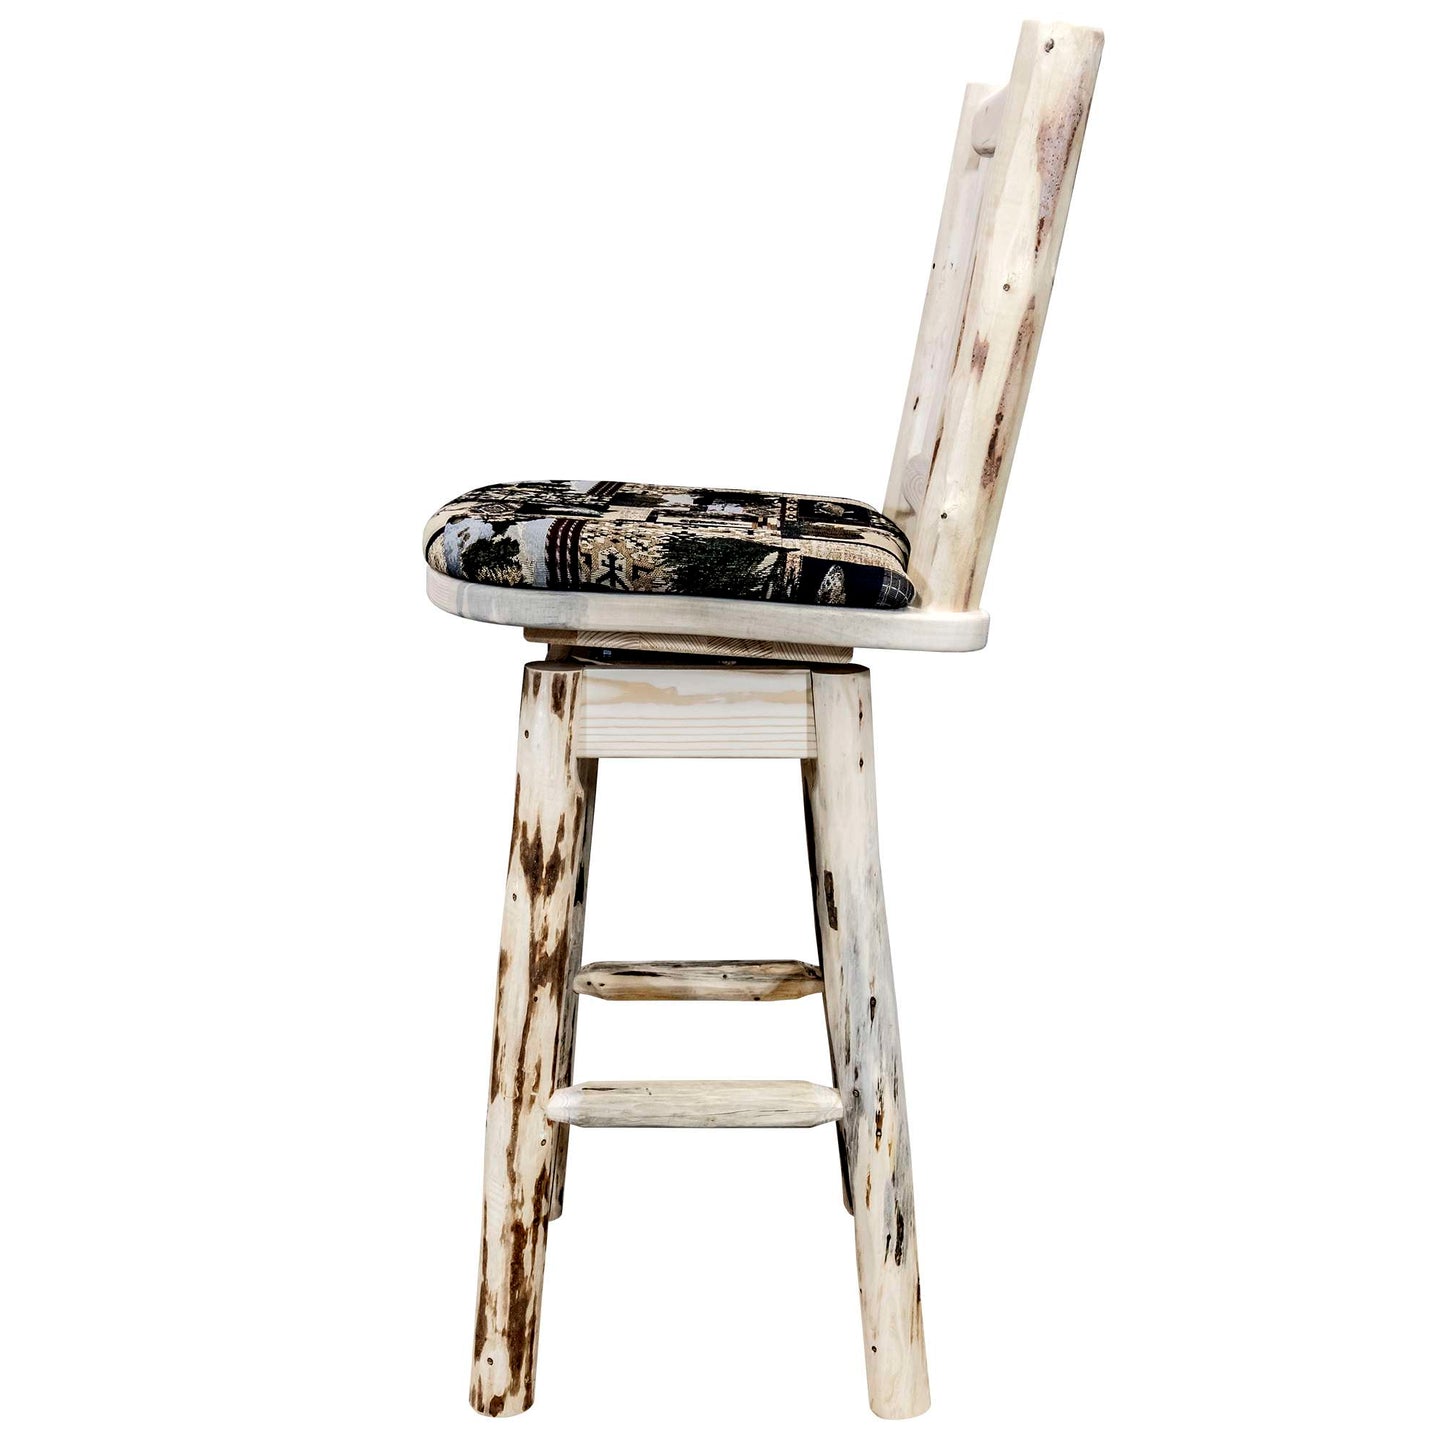 Montana Woodworks - Montana Collection Counter Height Barstool w/ Back & Swivel - Woodland Upholstery, Clear Lacquer Finish  - 38 in